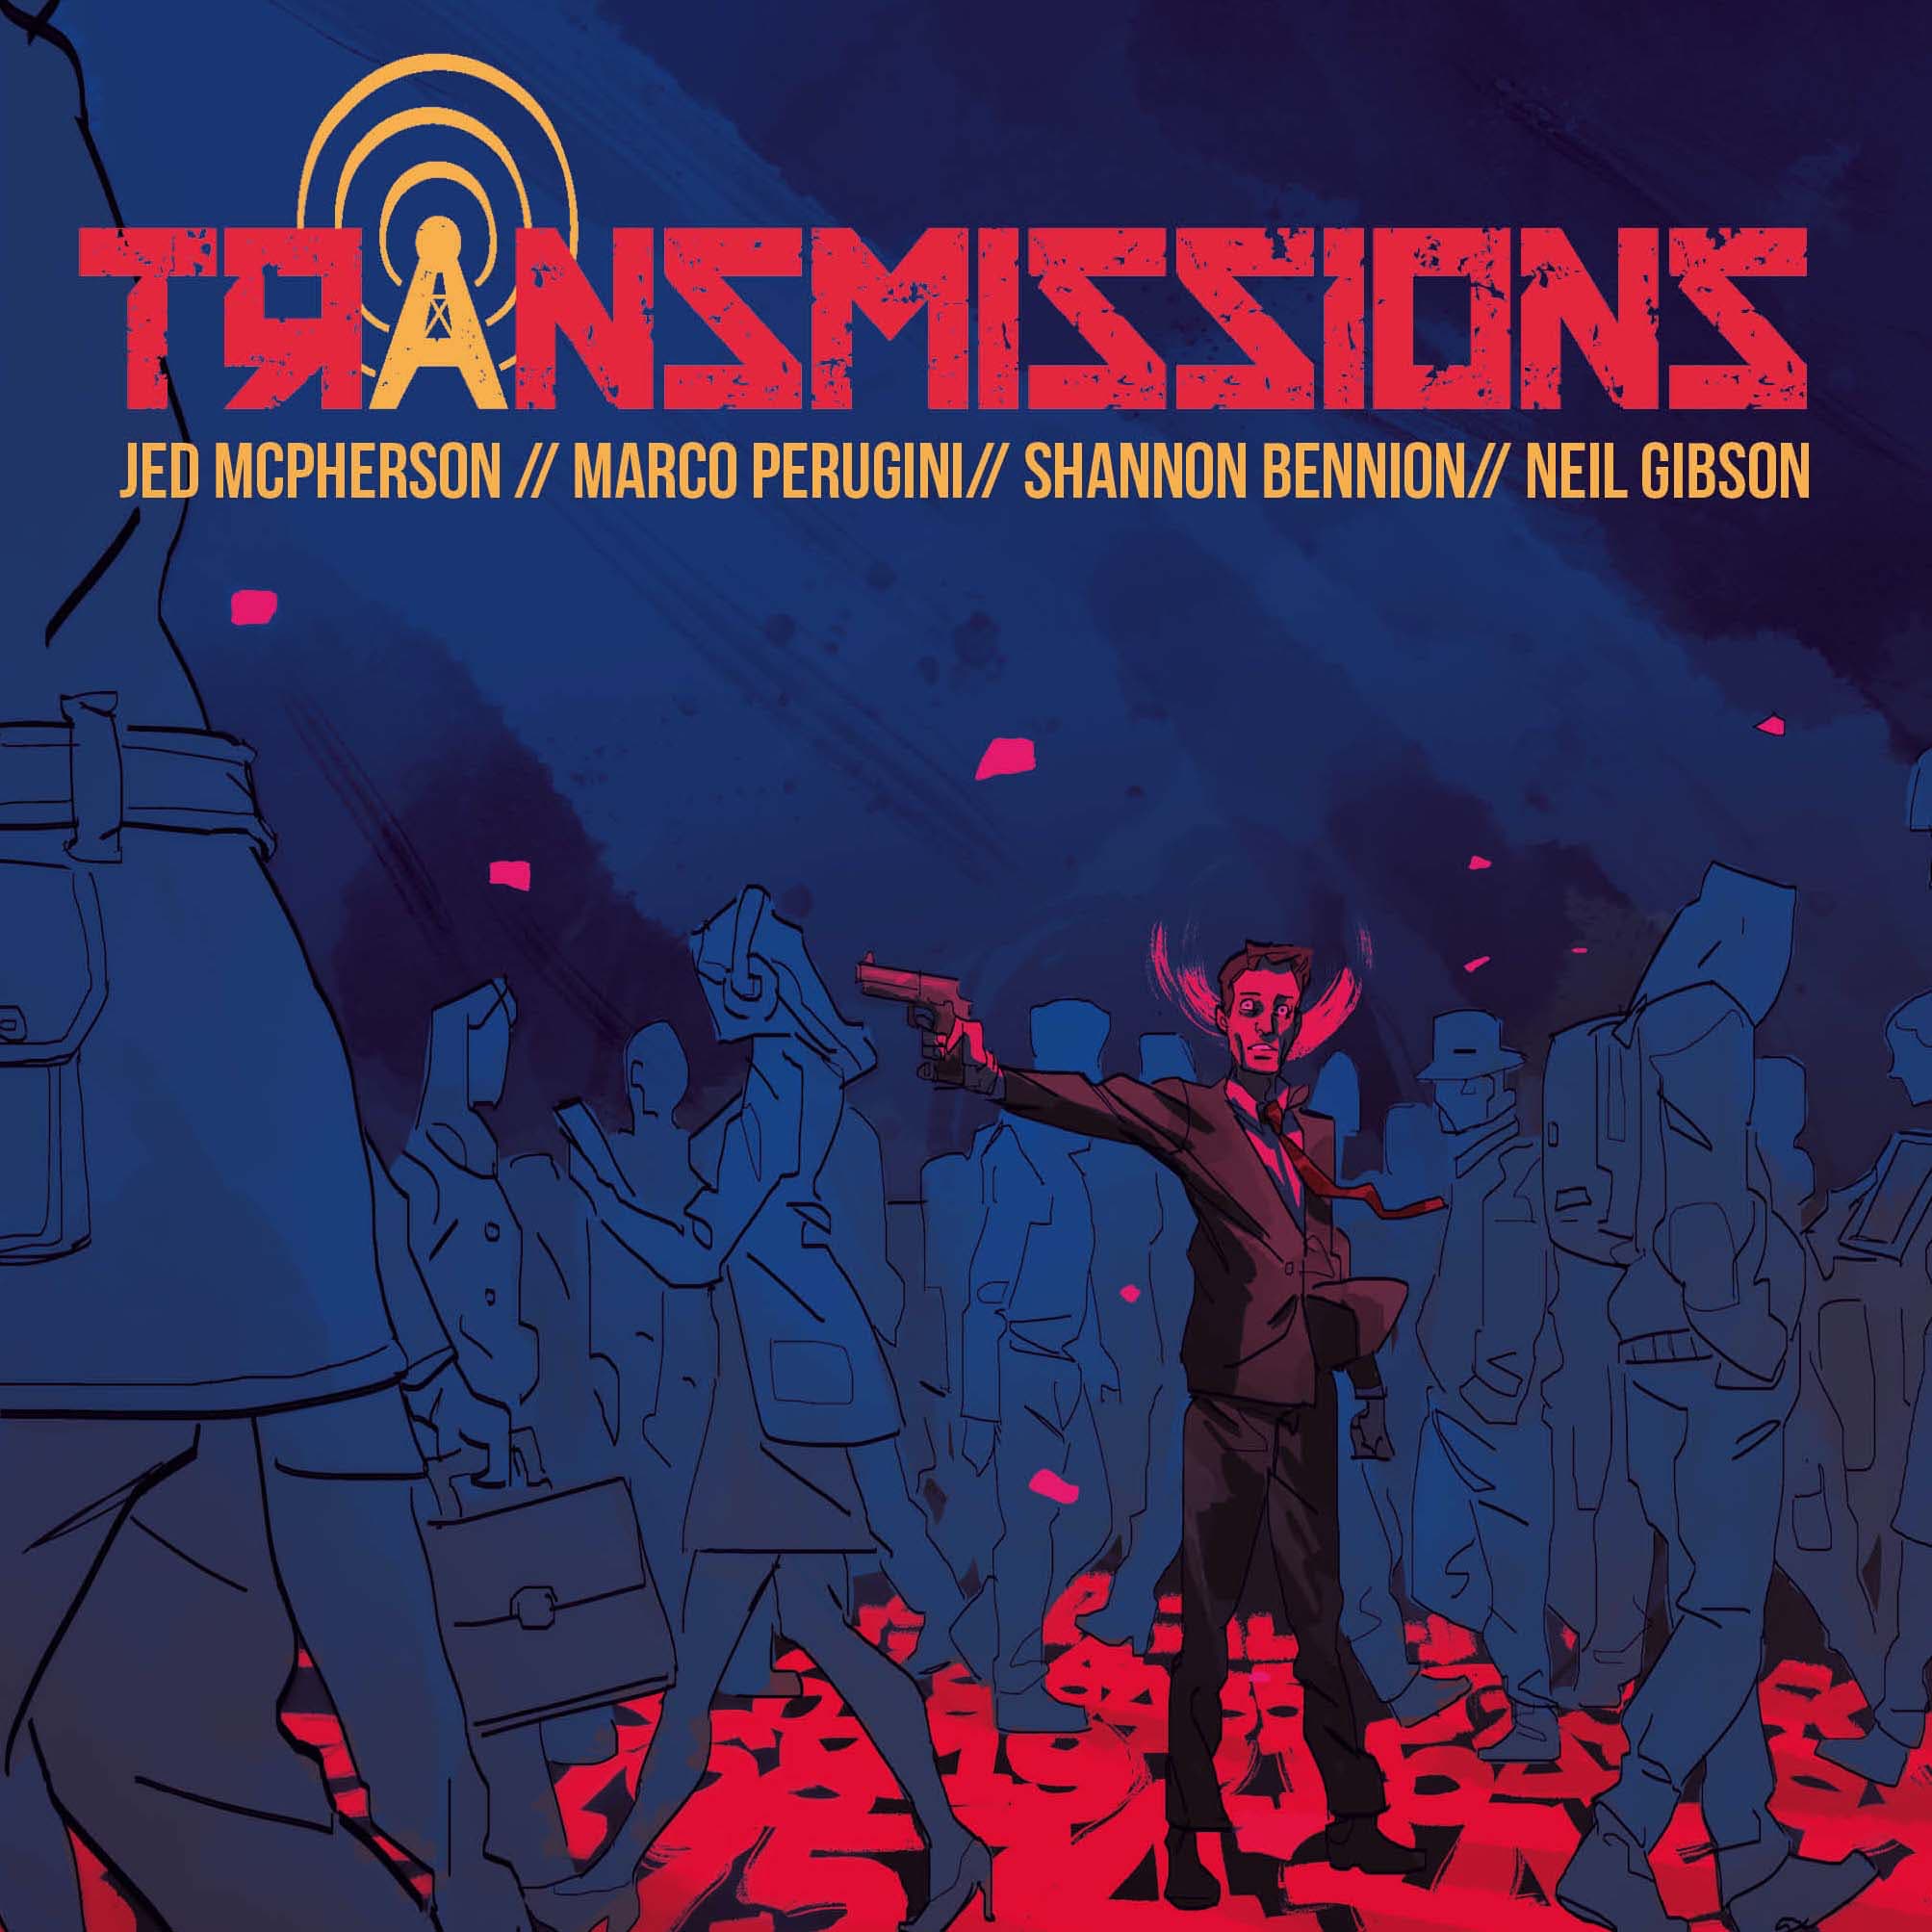 The Transmissions OGN cover showing a man standing in the middle of a busy intersection holding a gun.